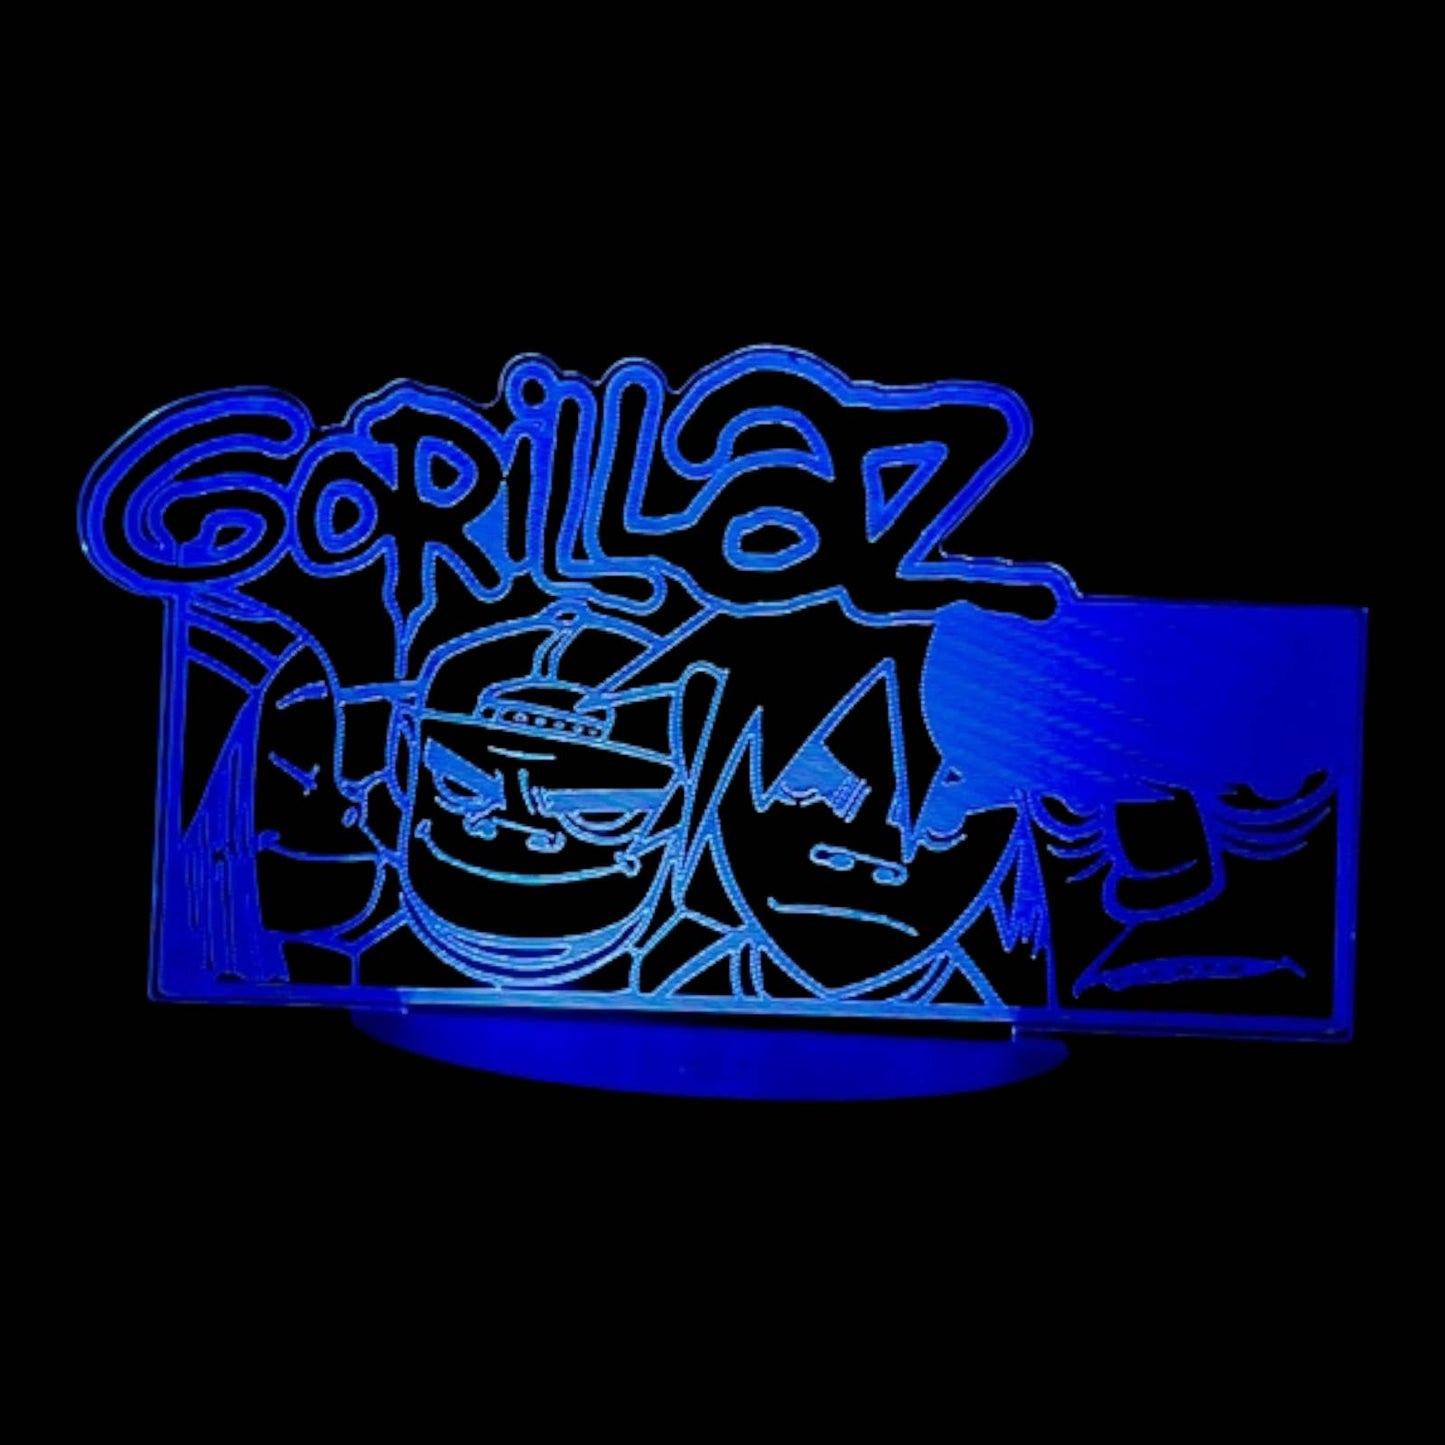 Gorillaz 3D LED Night-Light 7 Color Changing Lamp w/ Touch Switch